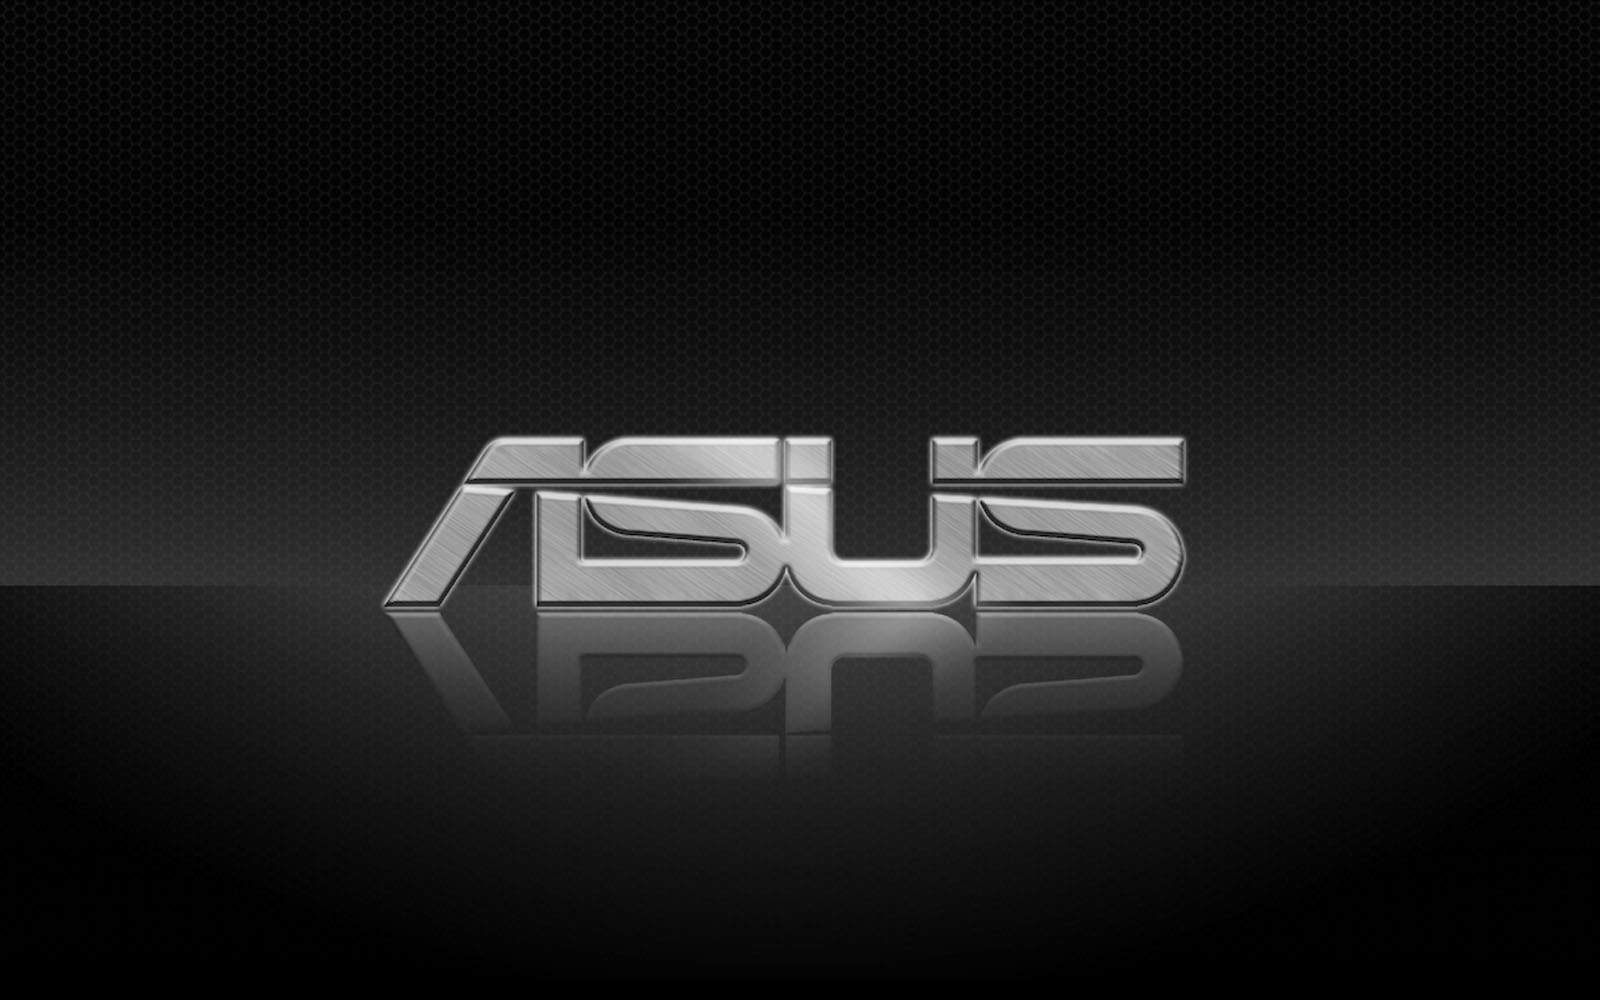 asus wallpapers asus desktop wallpapers asus desktop backgrounds asus